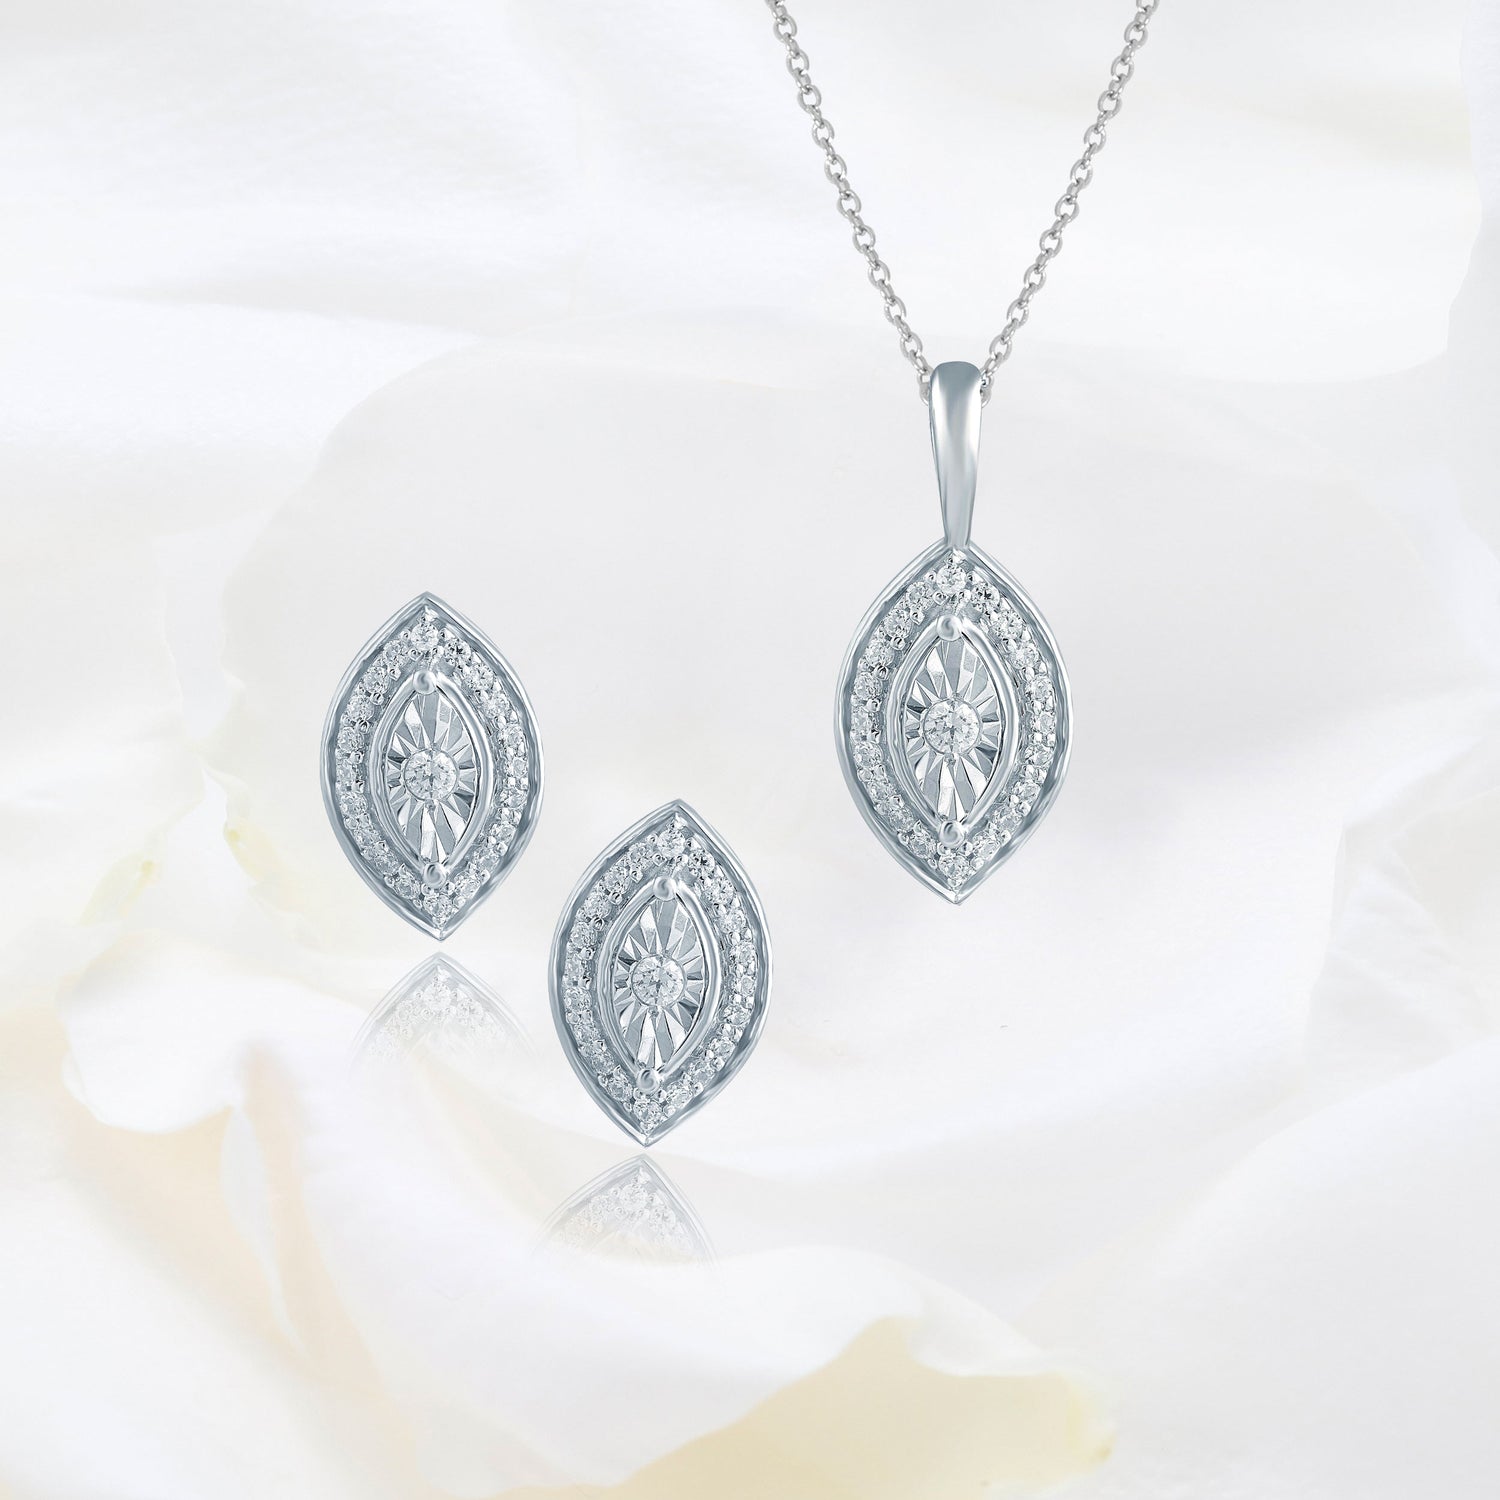 Set of 2 : 3/10CT TW Diamond Marquise Shaped Pendant & Earrings in Sterling Silver